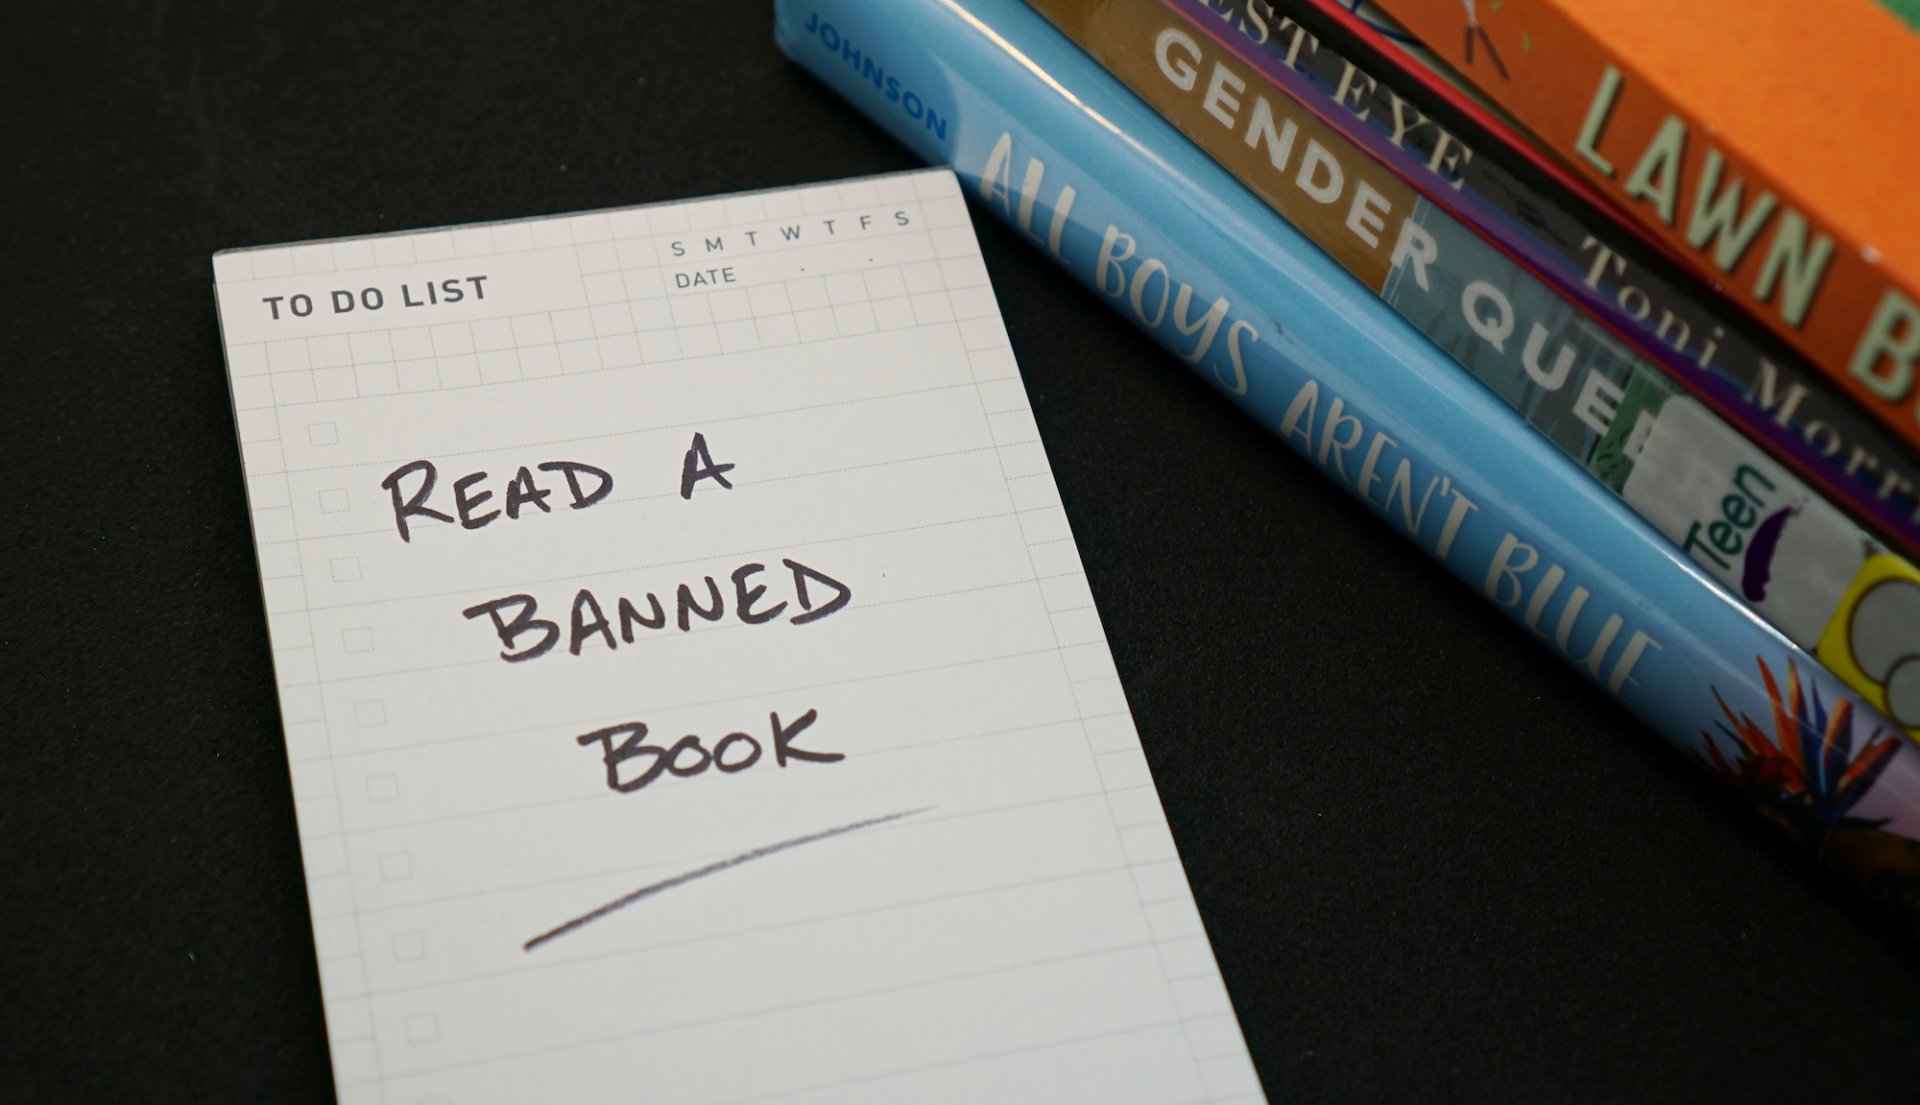 Why Are Schools Banning Books?, Smart News